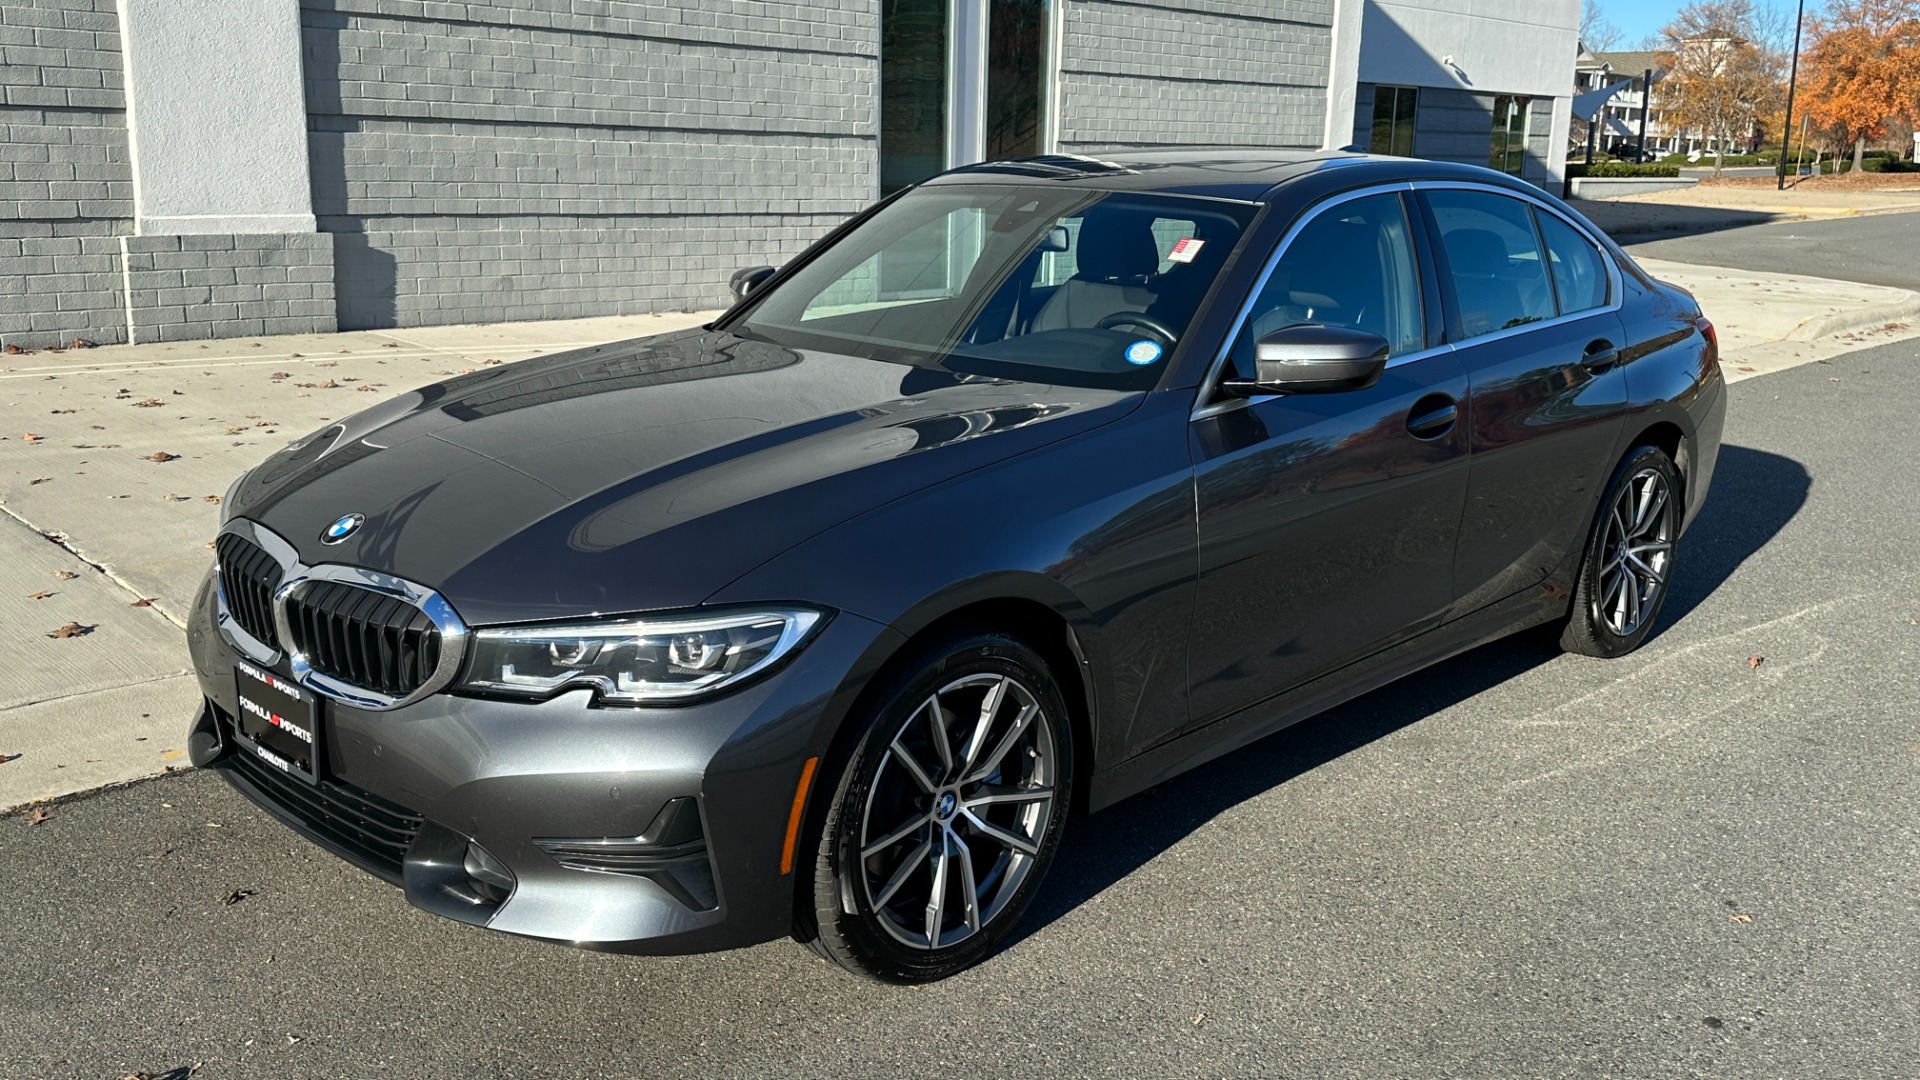 Used 2020 BMW 3 Series 330i xDRIVE / CONVENIENCE / HEATED SEATS / AMBIENT LIGHTING / REMOTE START for sale $35,995 at Formula Imports in Charlotte NC 28227 5